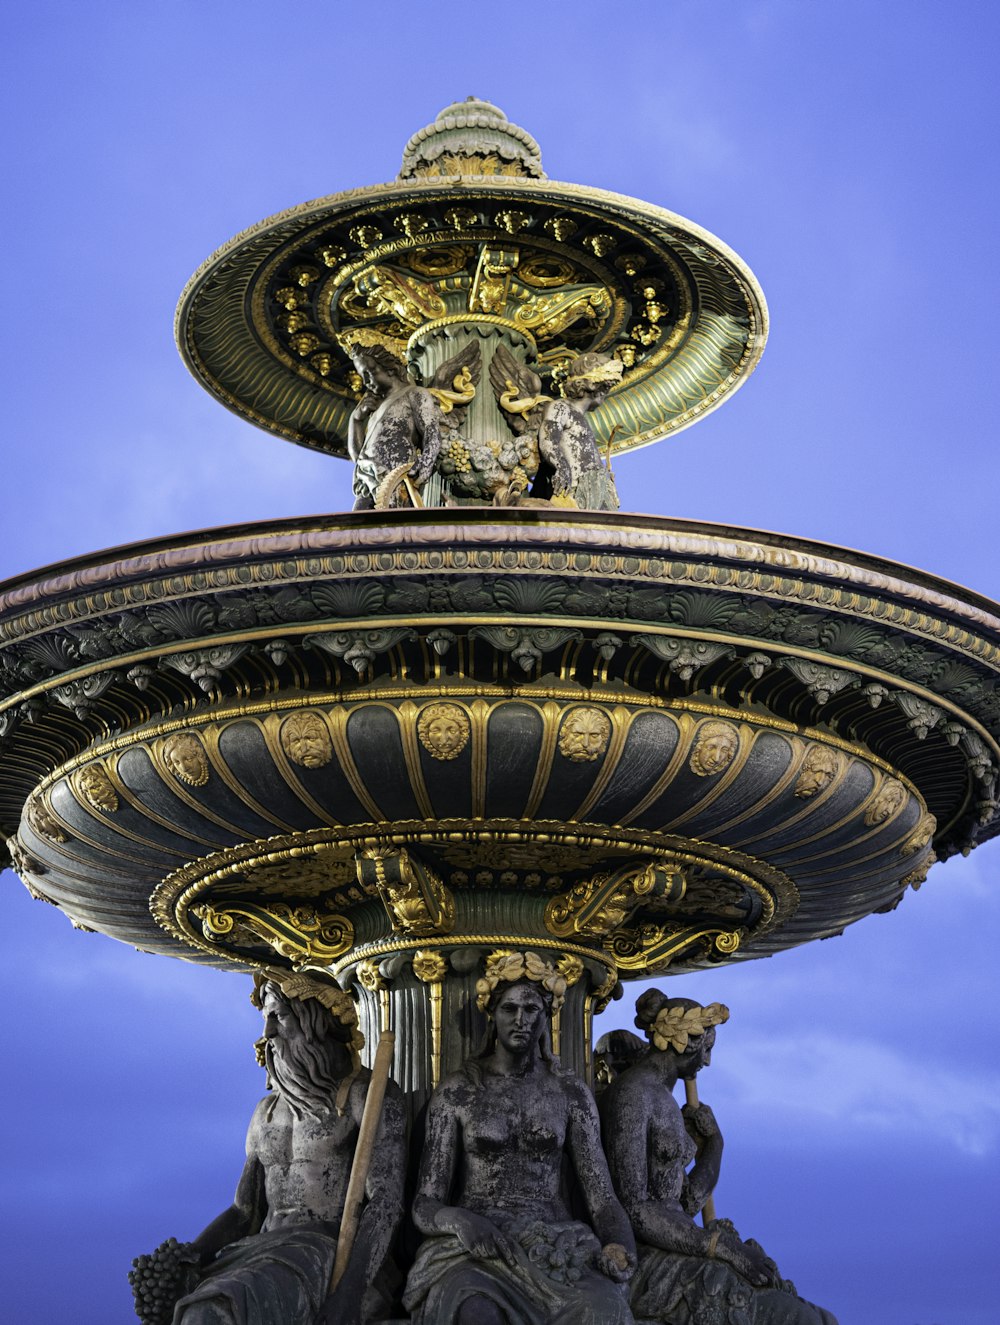 a fountain with statues on top of it against a blue sky